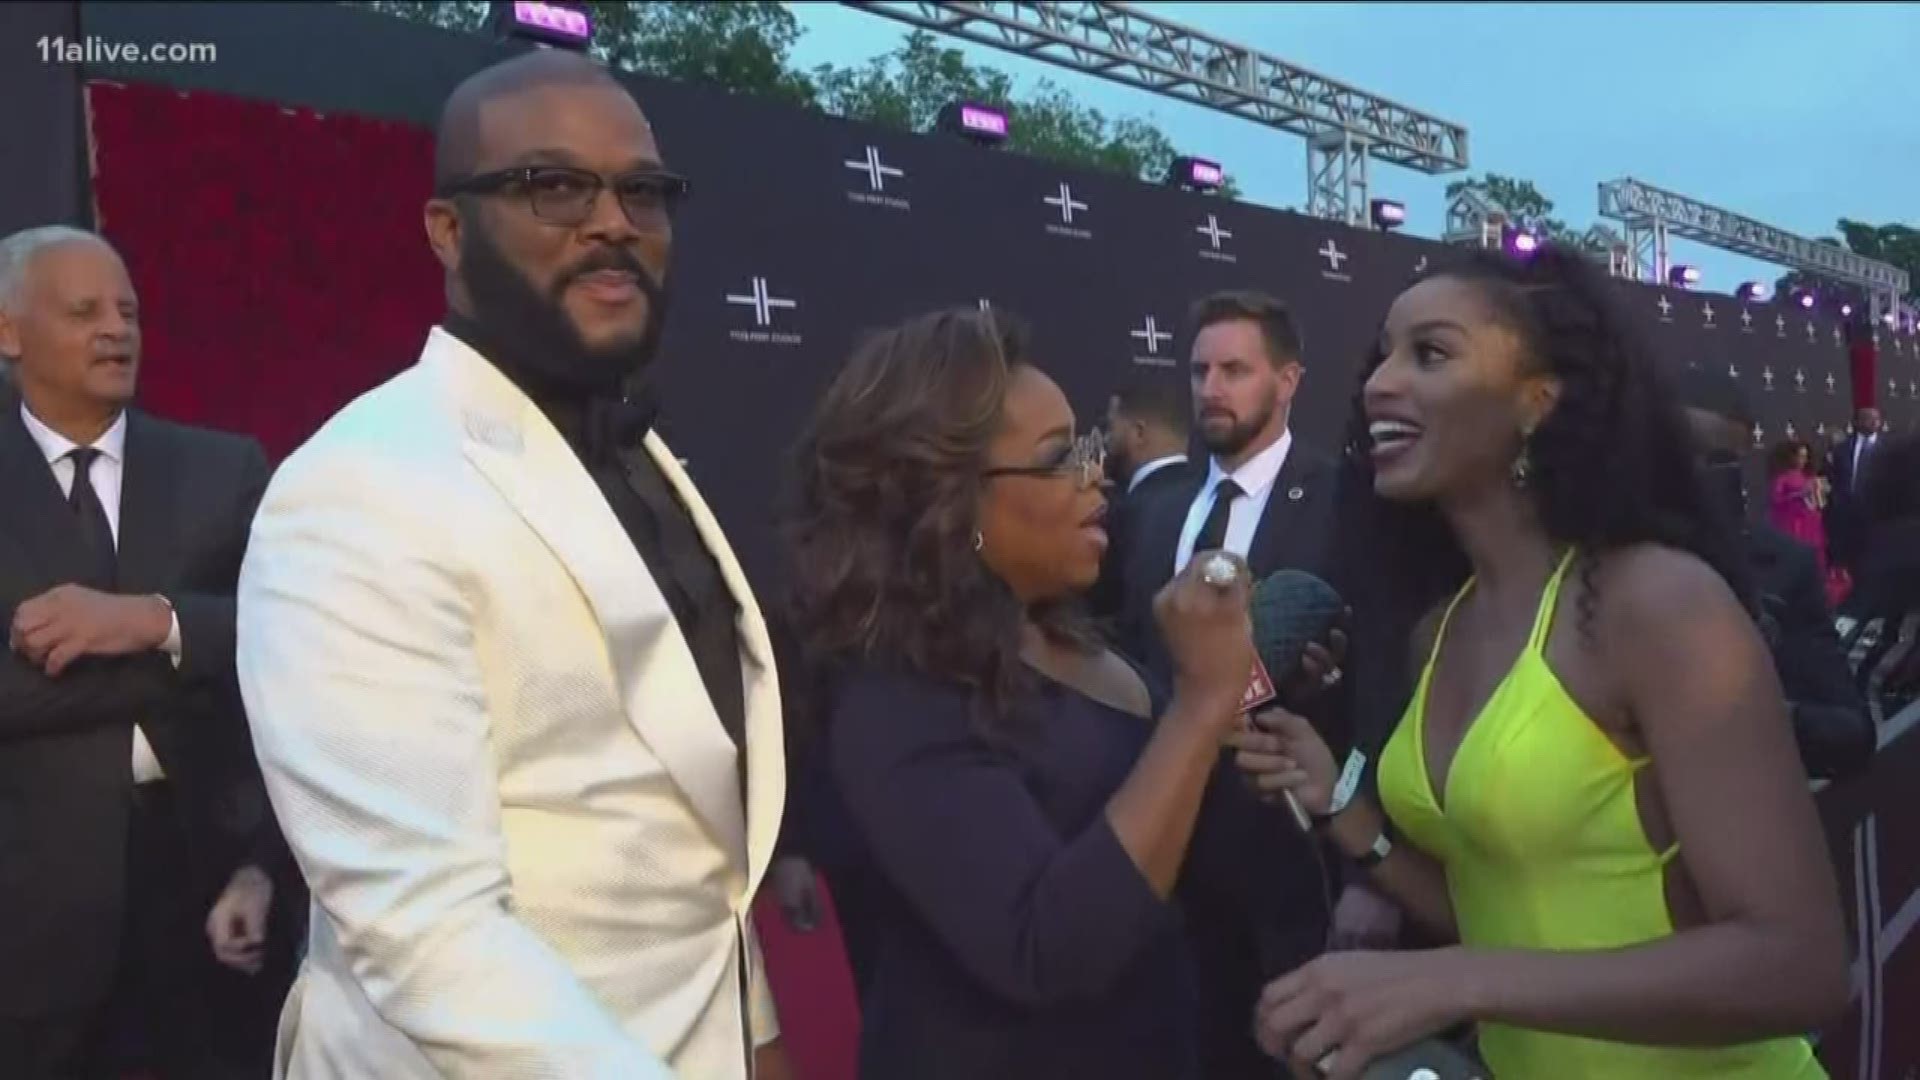 Tyler Perry Studios held its gala grand opening on Saturday night in southwest Atlanta on what was once Fort McPherson.